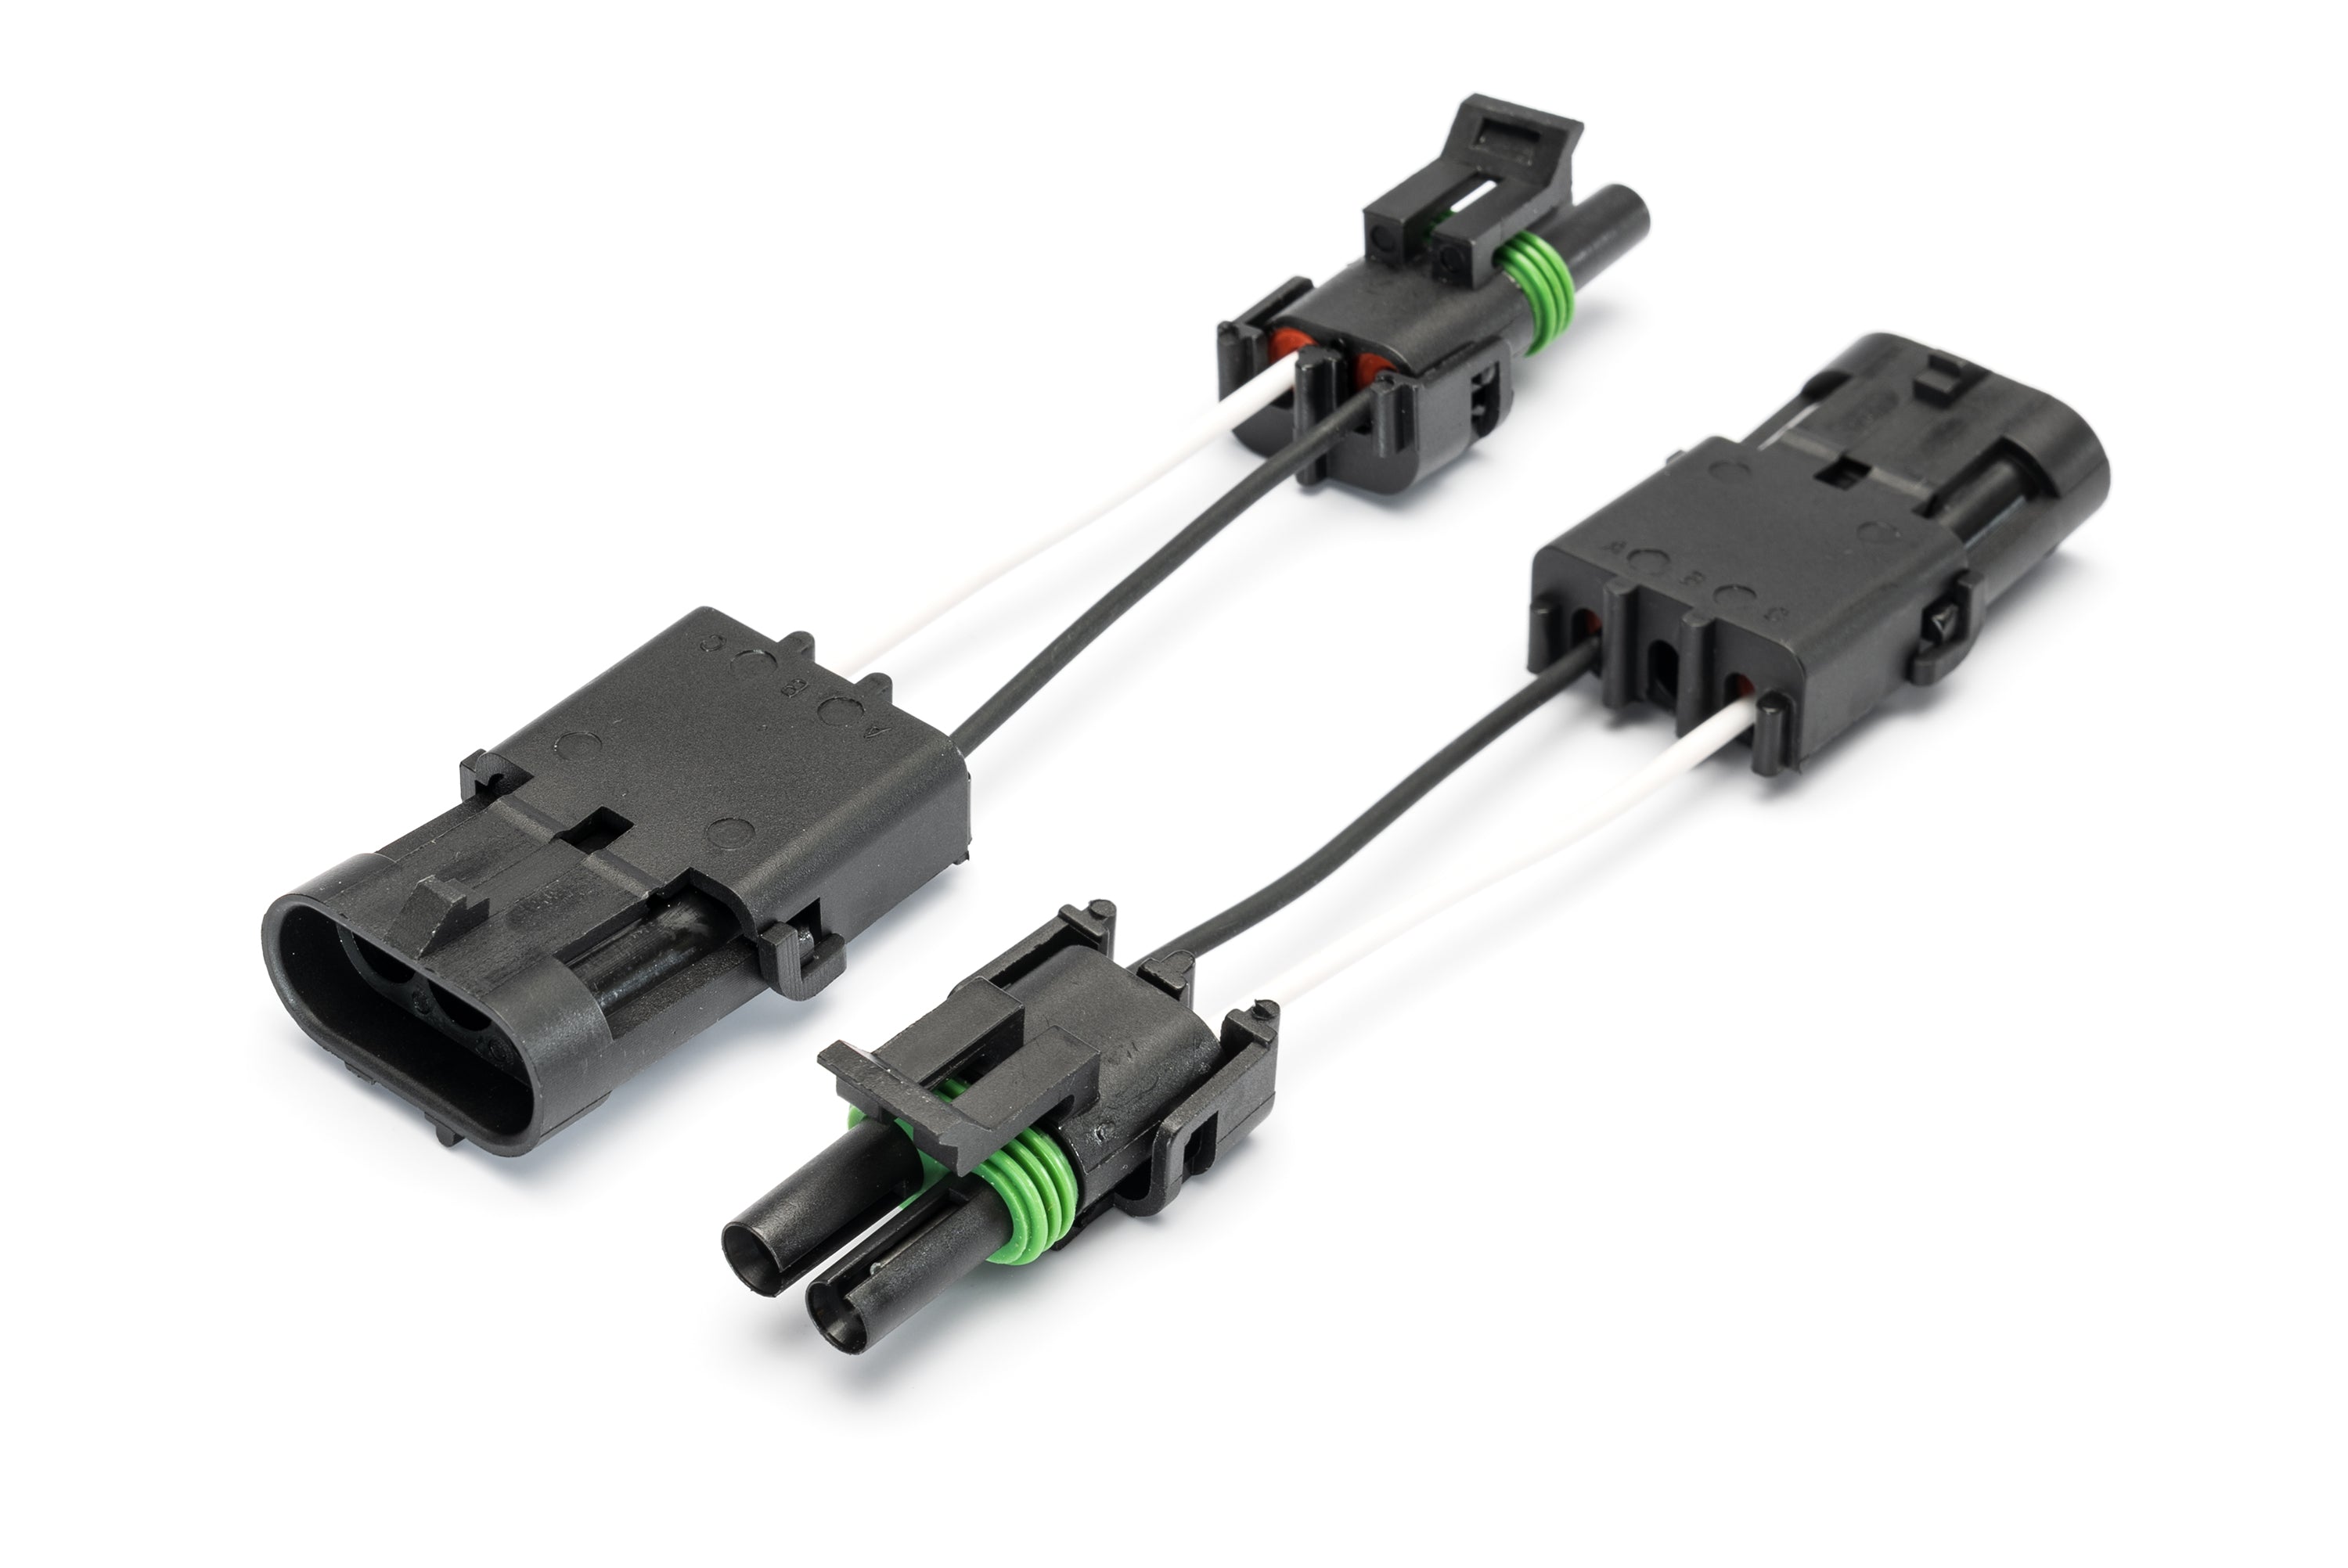 SPV Parts Harness 2 POLE WP Connector CROSSOVER Adapters (Pair) - SPV Harness System (Works with MANY vehicles, See Details)